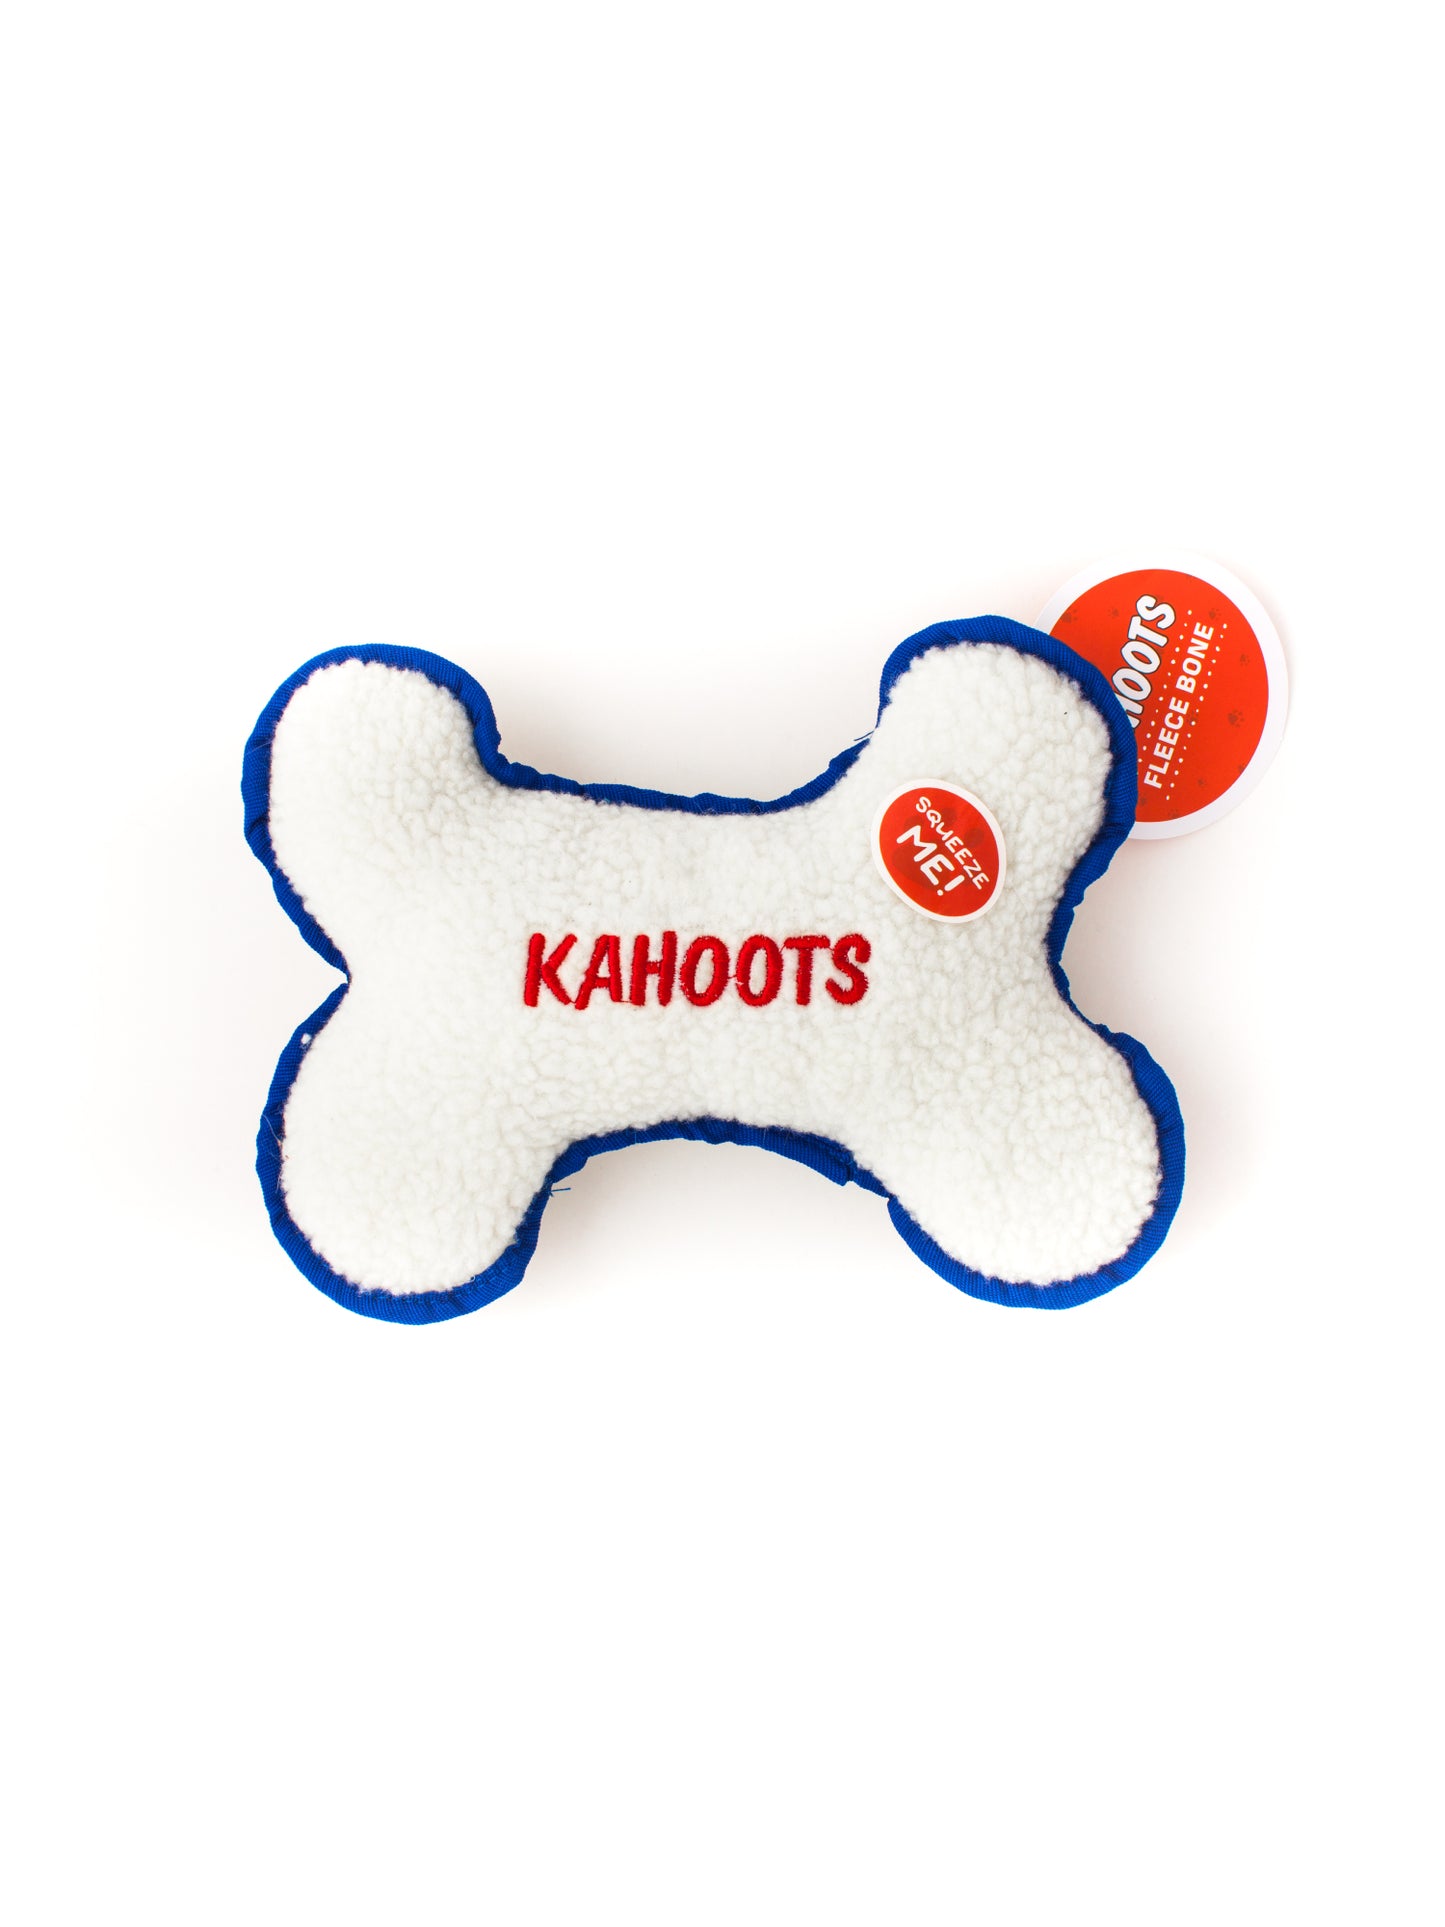 White, fuzzy, plush bone with "Kahoots" embroidered in the middle